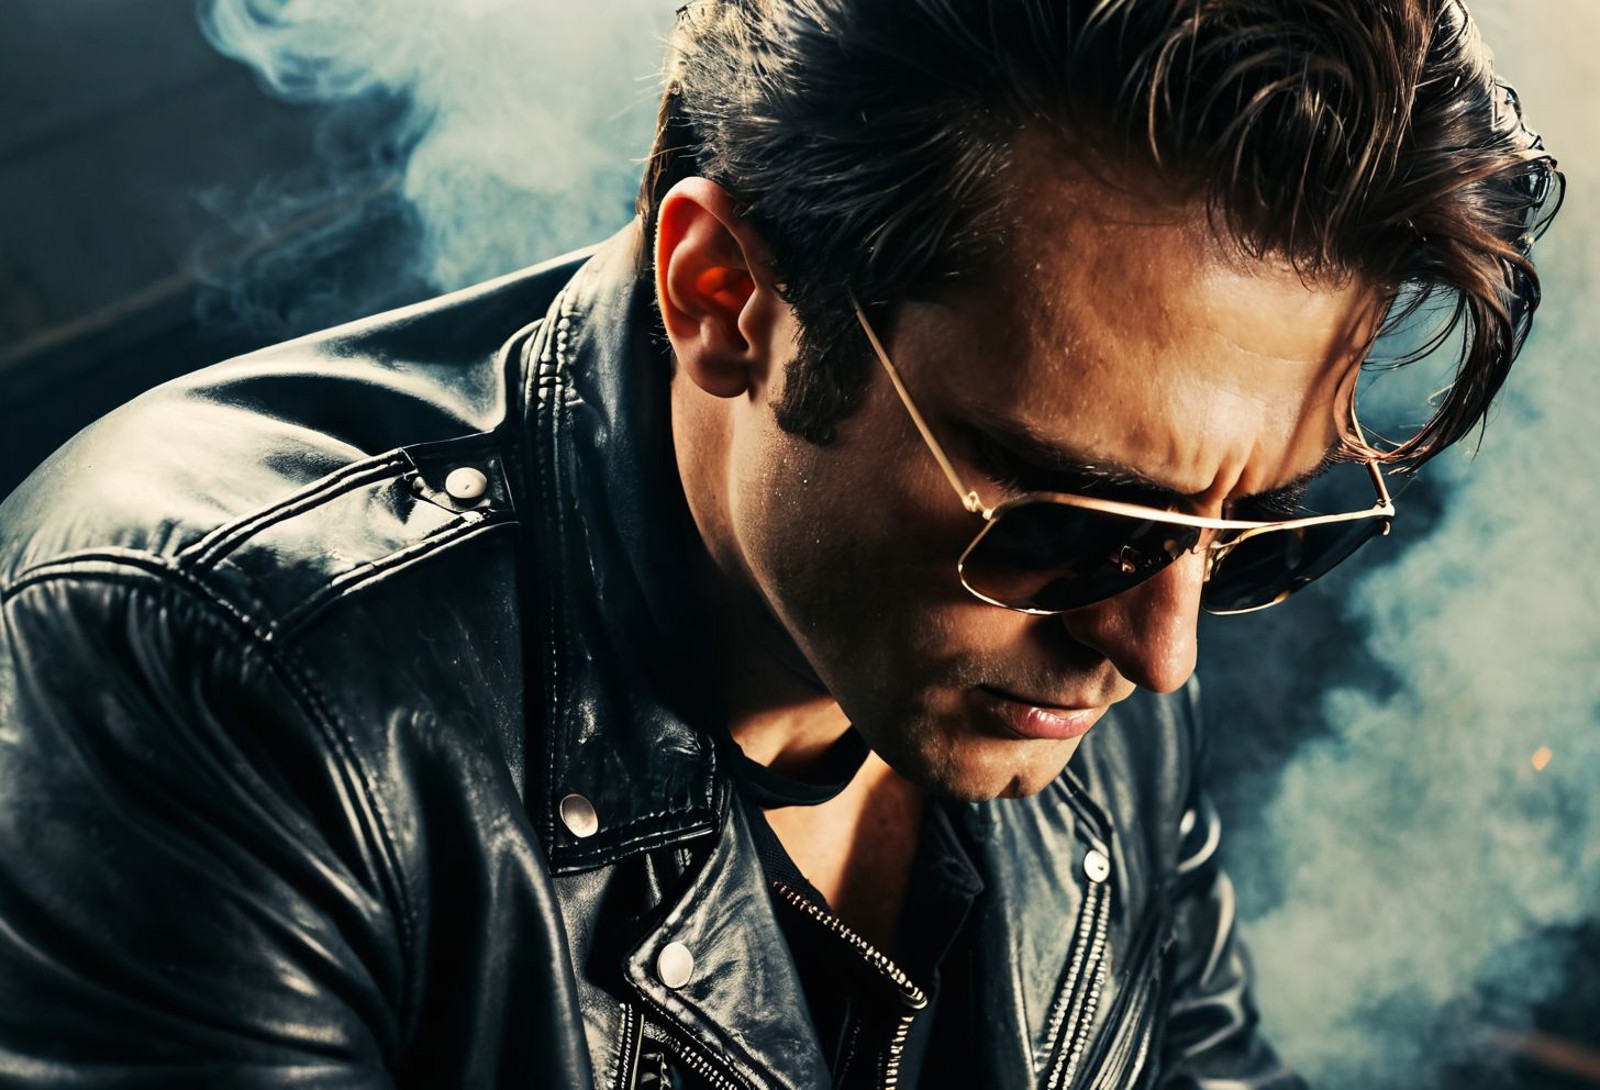 The image features a close-up of a man wearing sunglasses and a leather jacket. The man is looking down at something, poss...